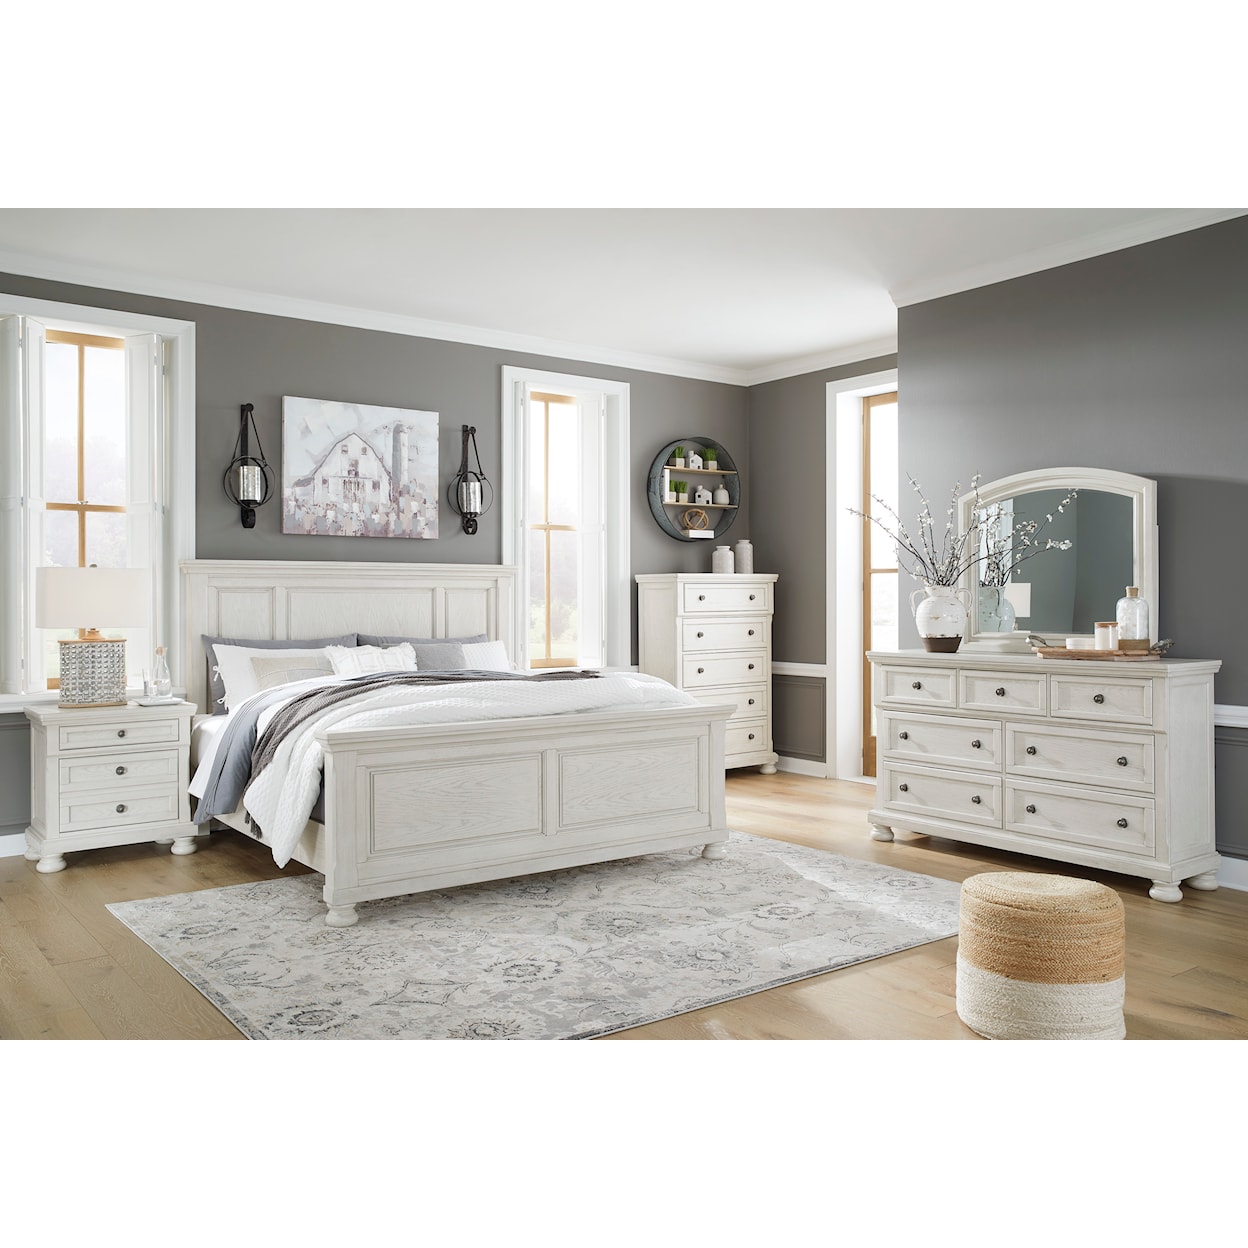 Signature Design by Ashley Robbinsdale California King Bedroom Group